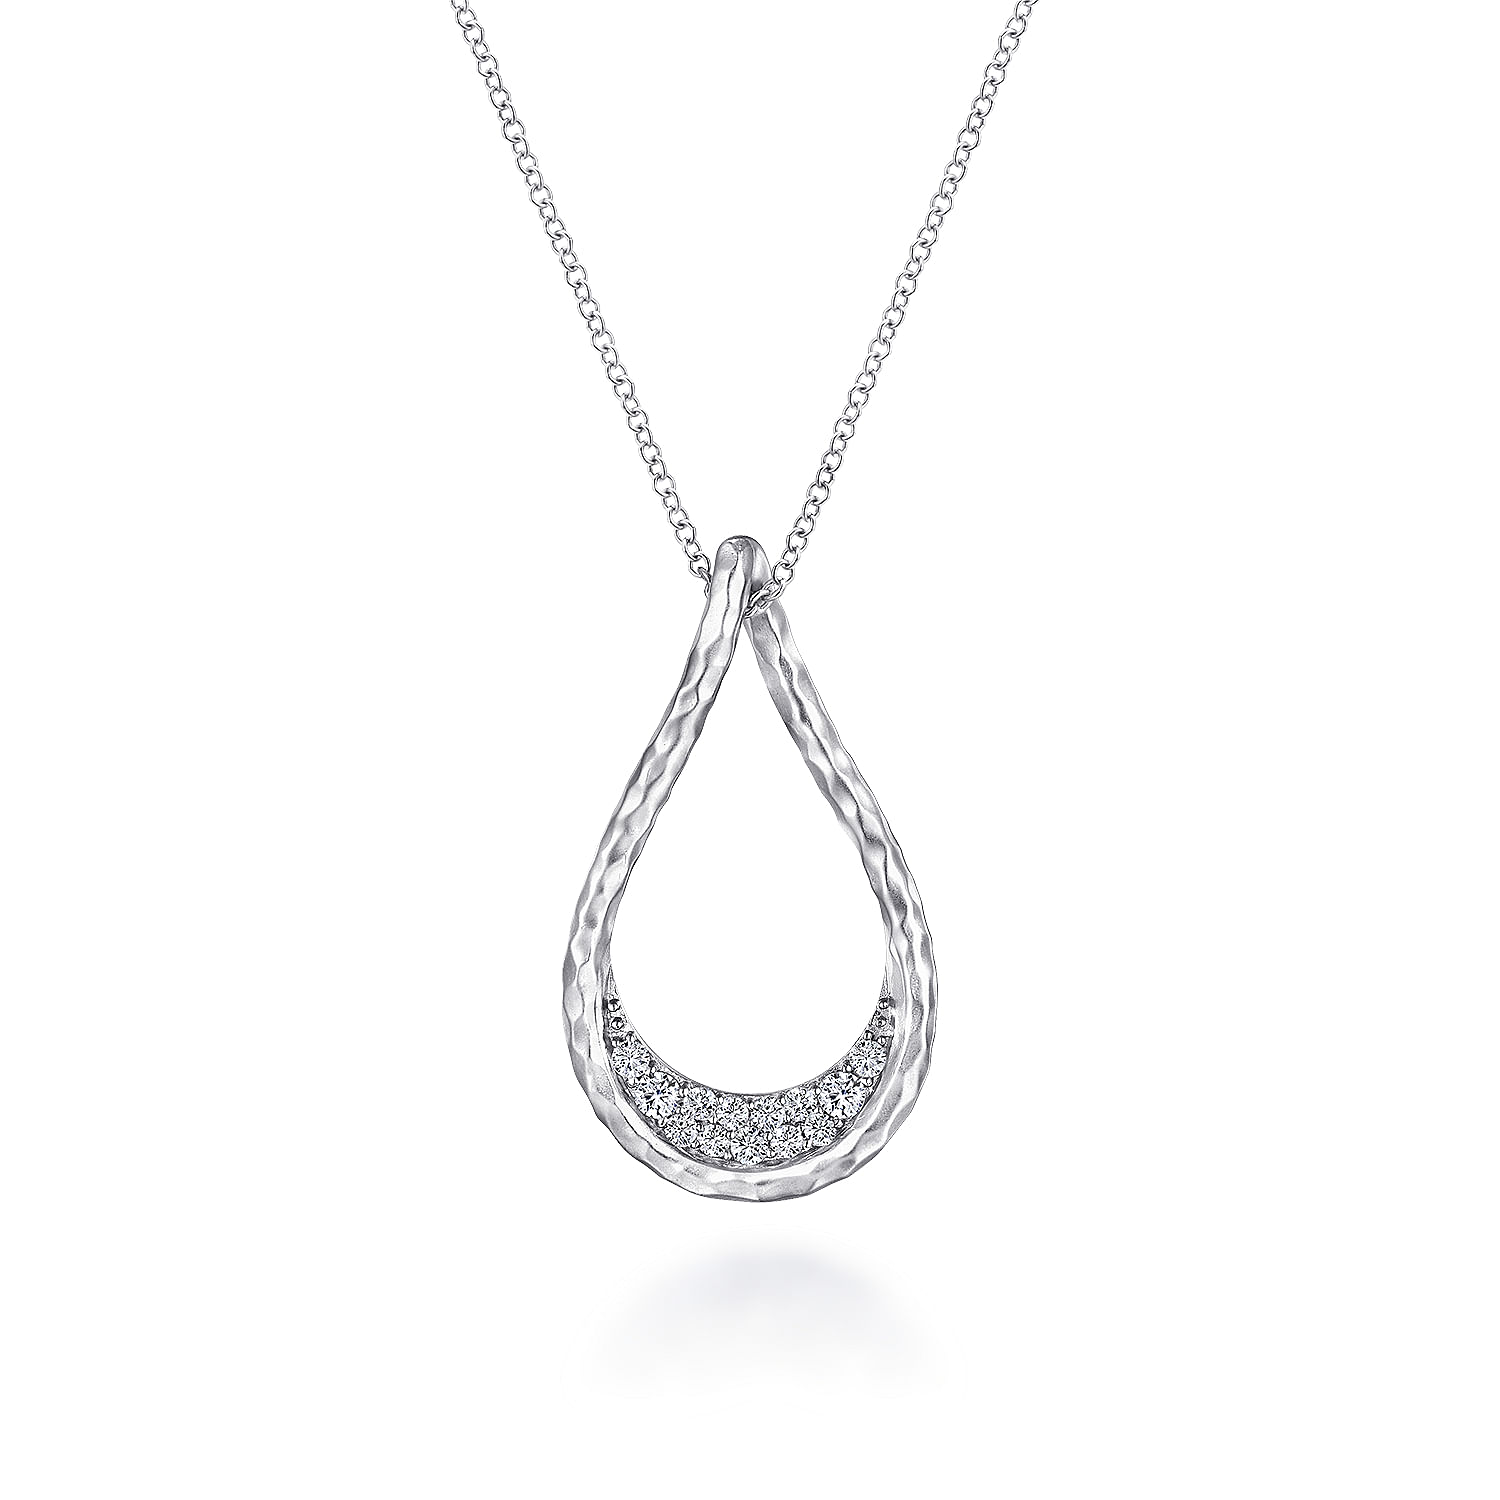 925 Sterling Silver Hammered Pear Shape White Sapphire Pendant Necklace